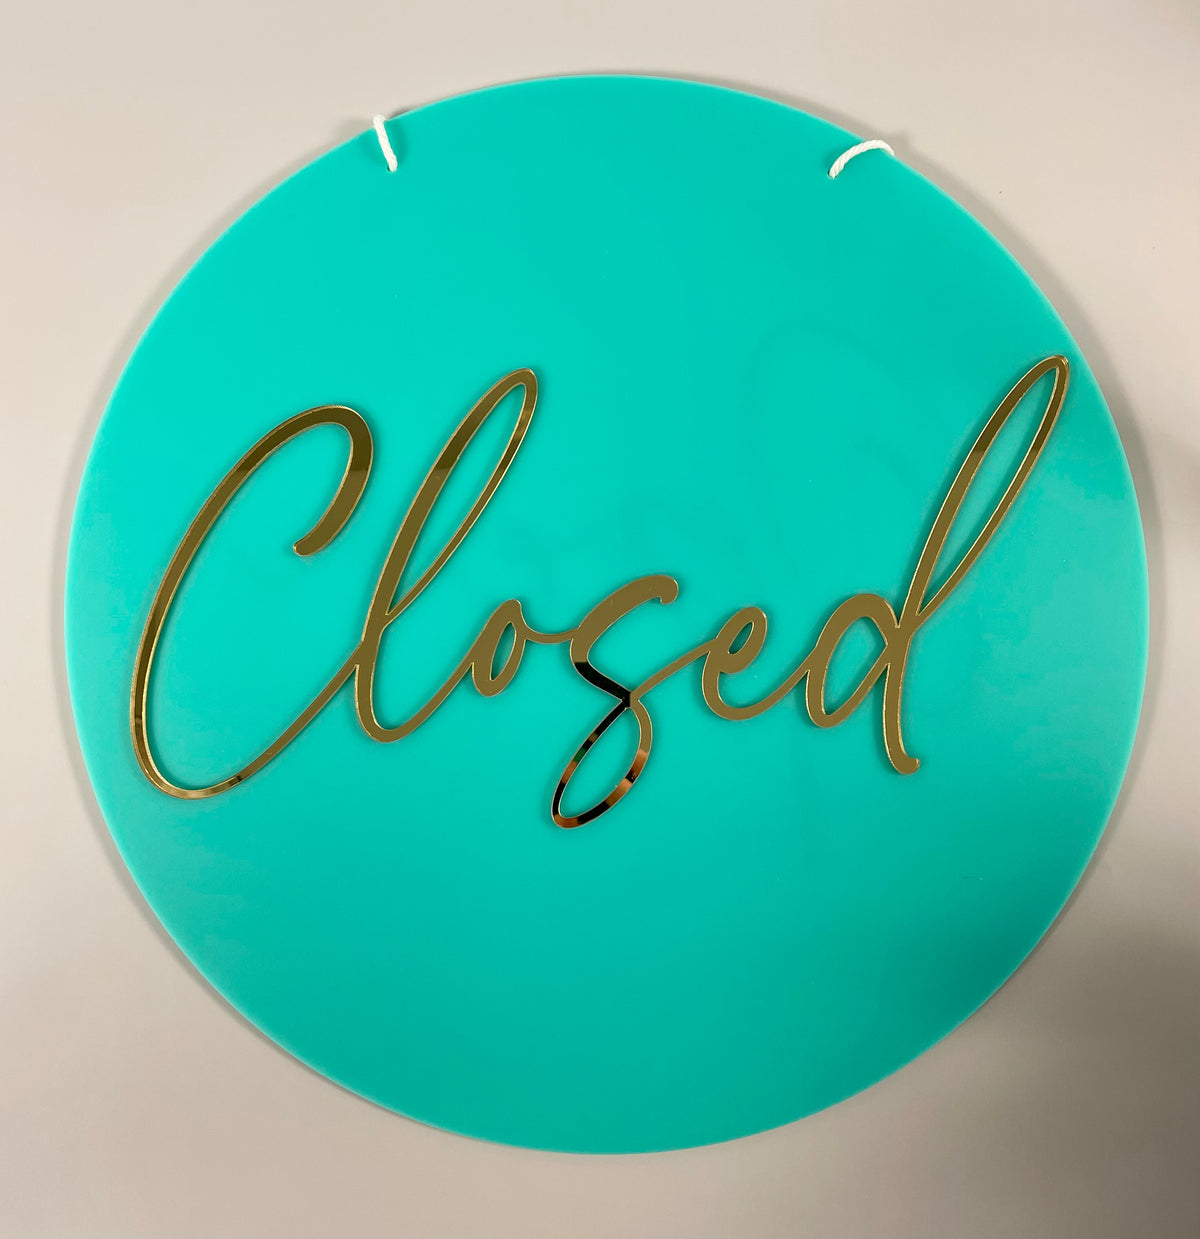 Open/closed sign (round)